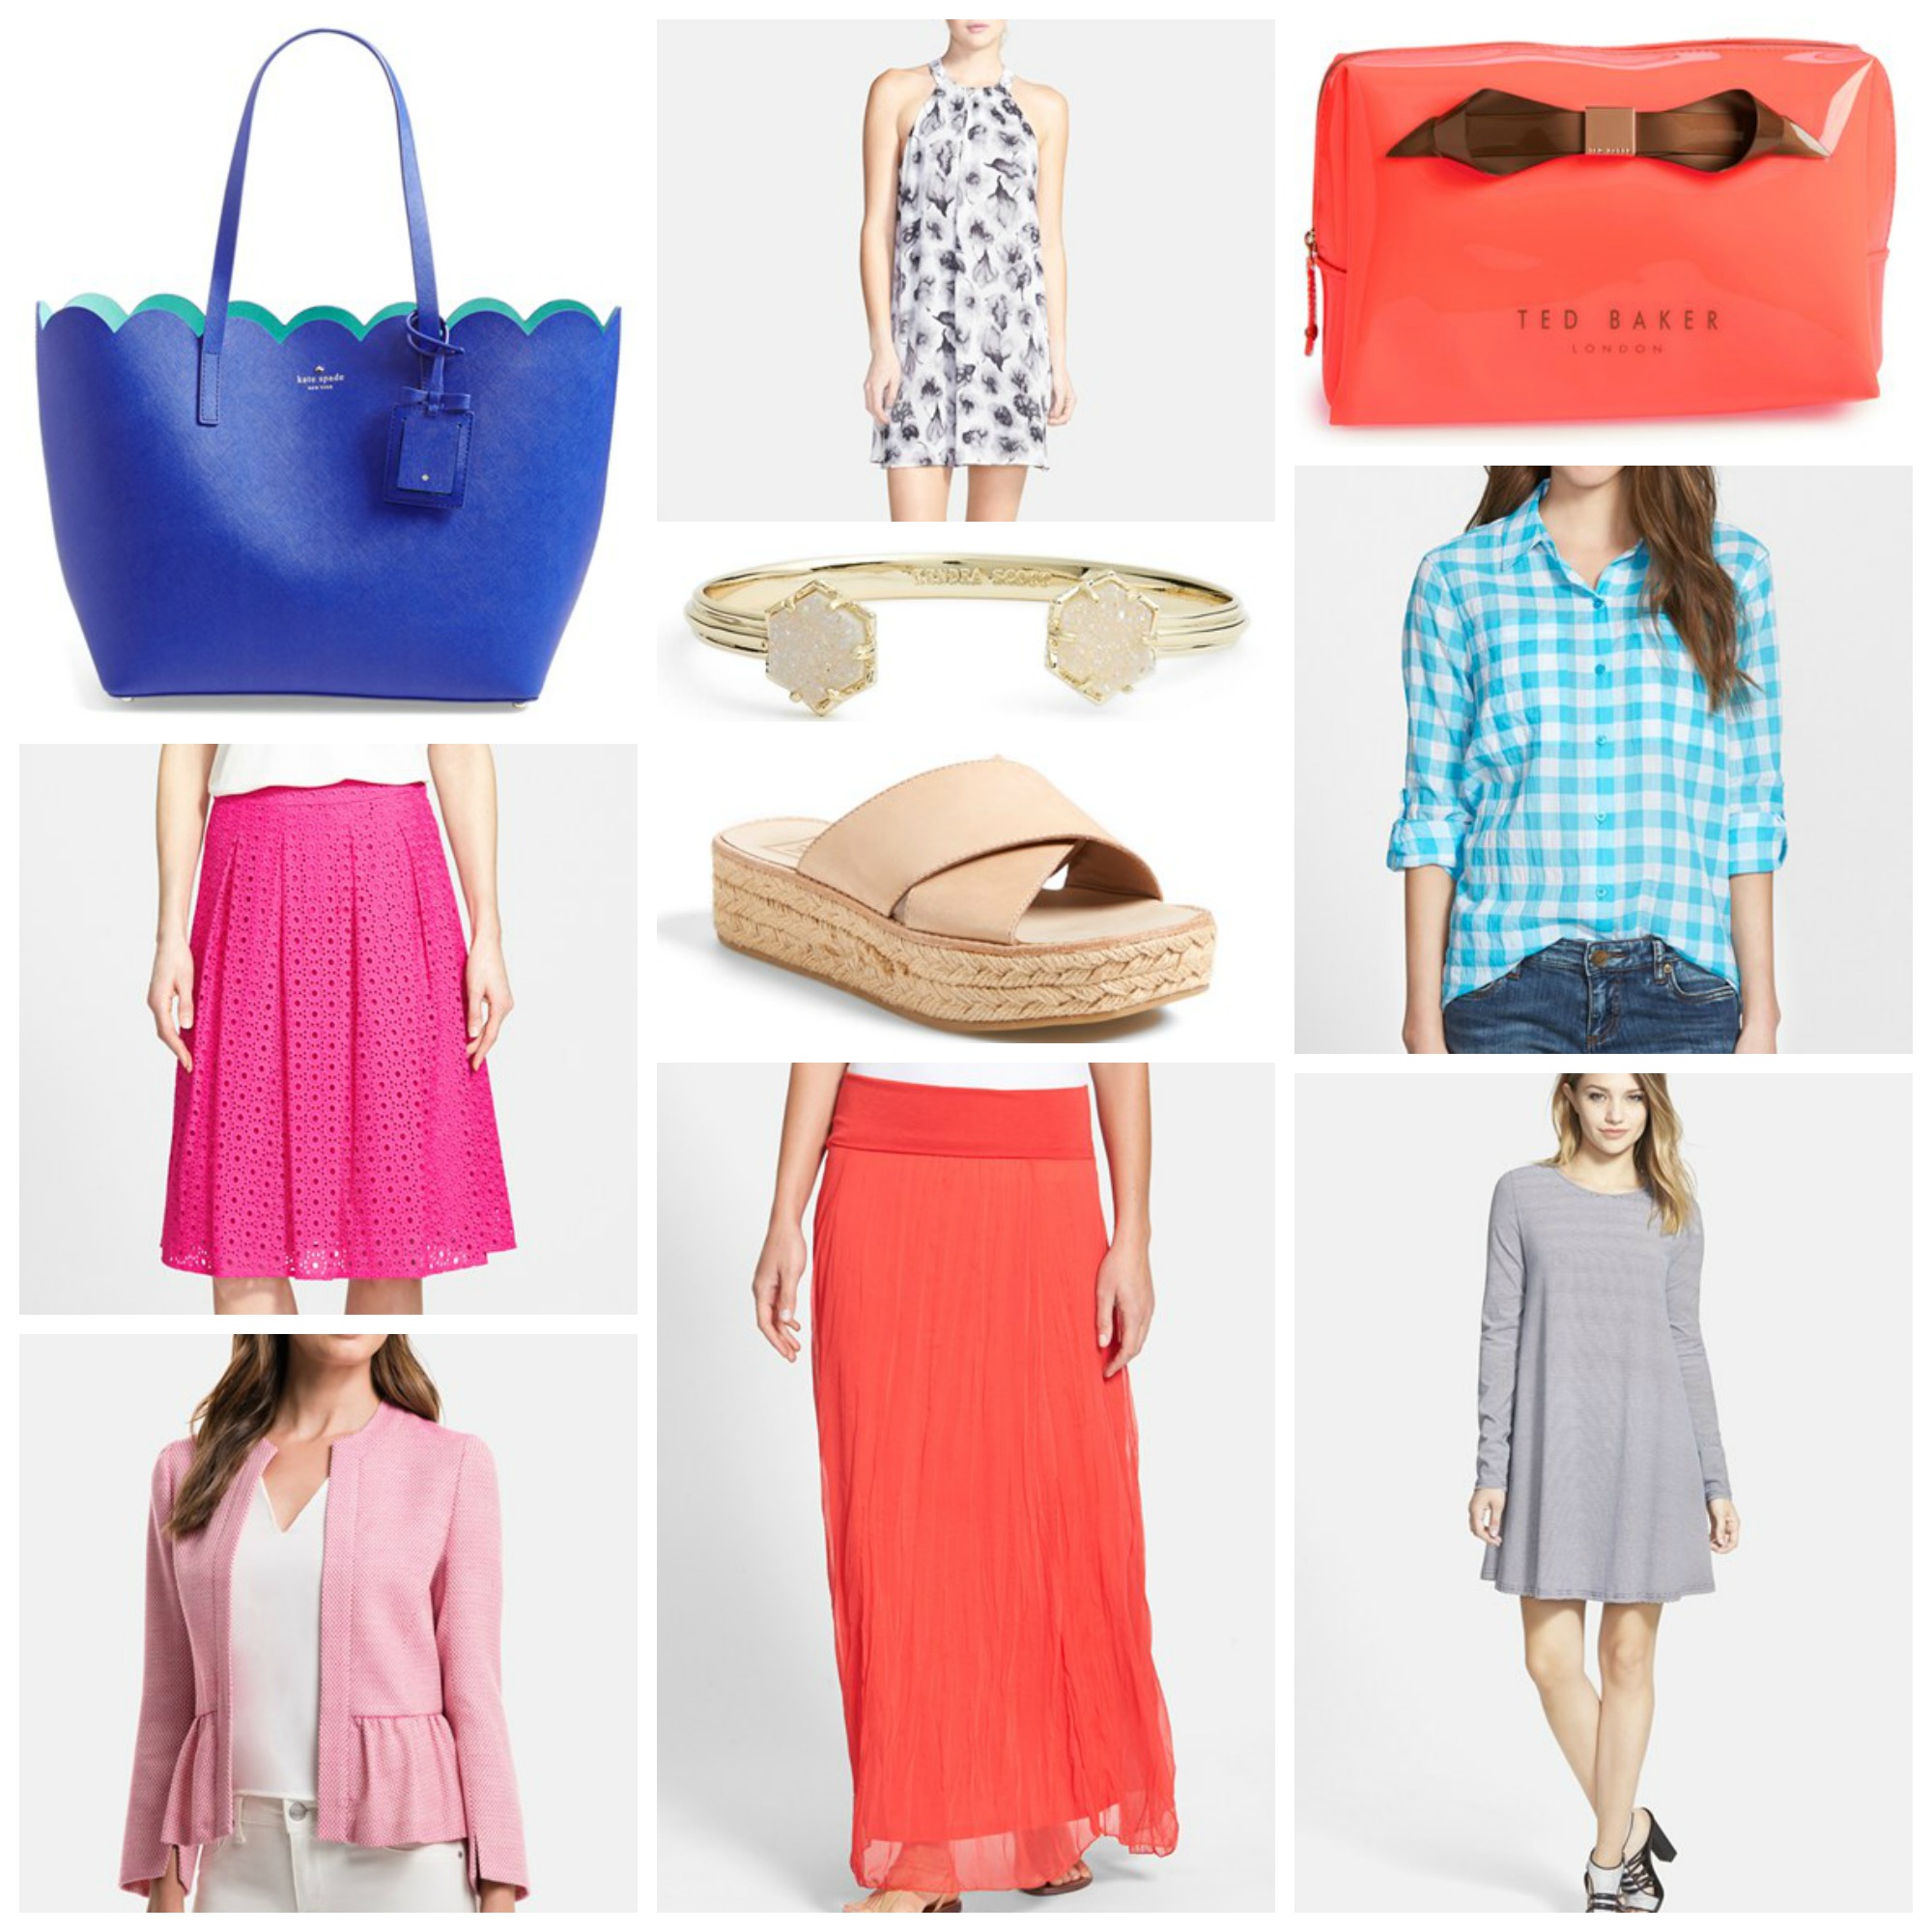 Nordstrom Half Yearly Sale 2015